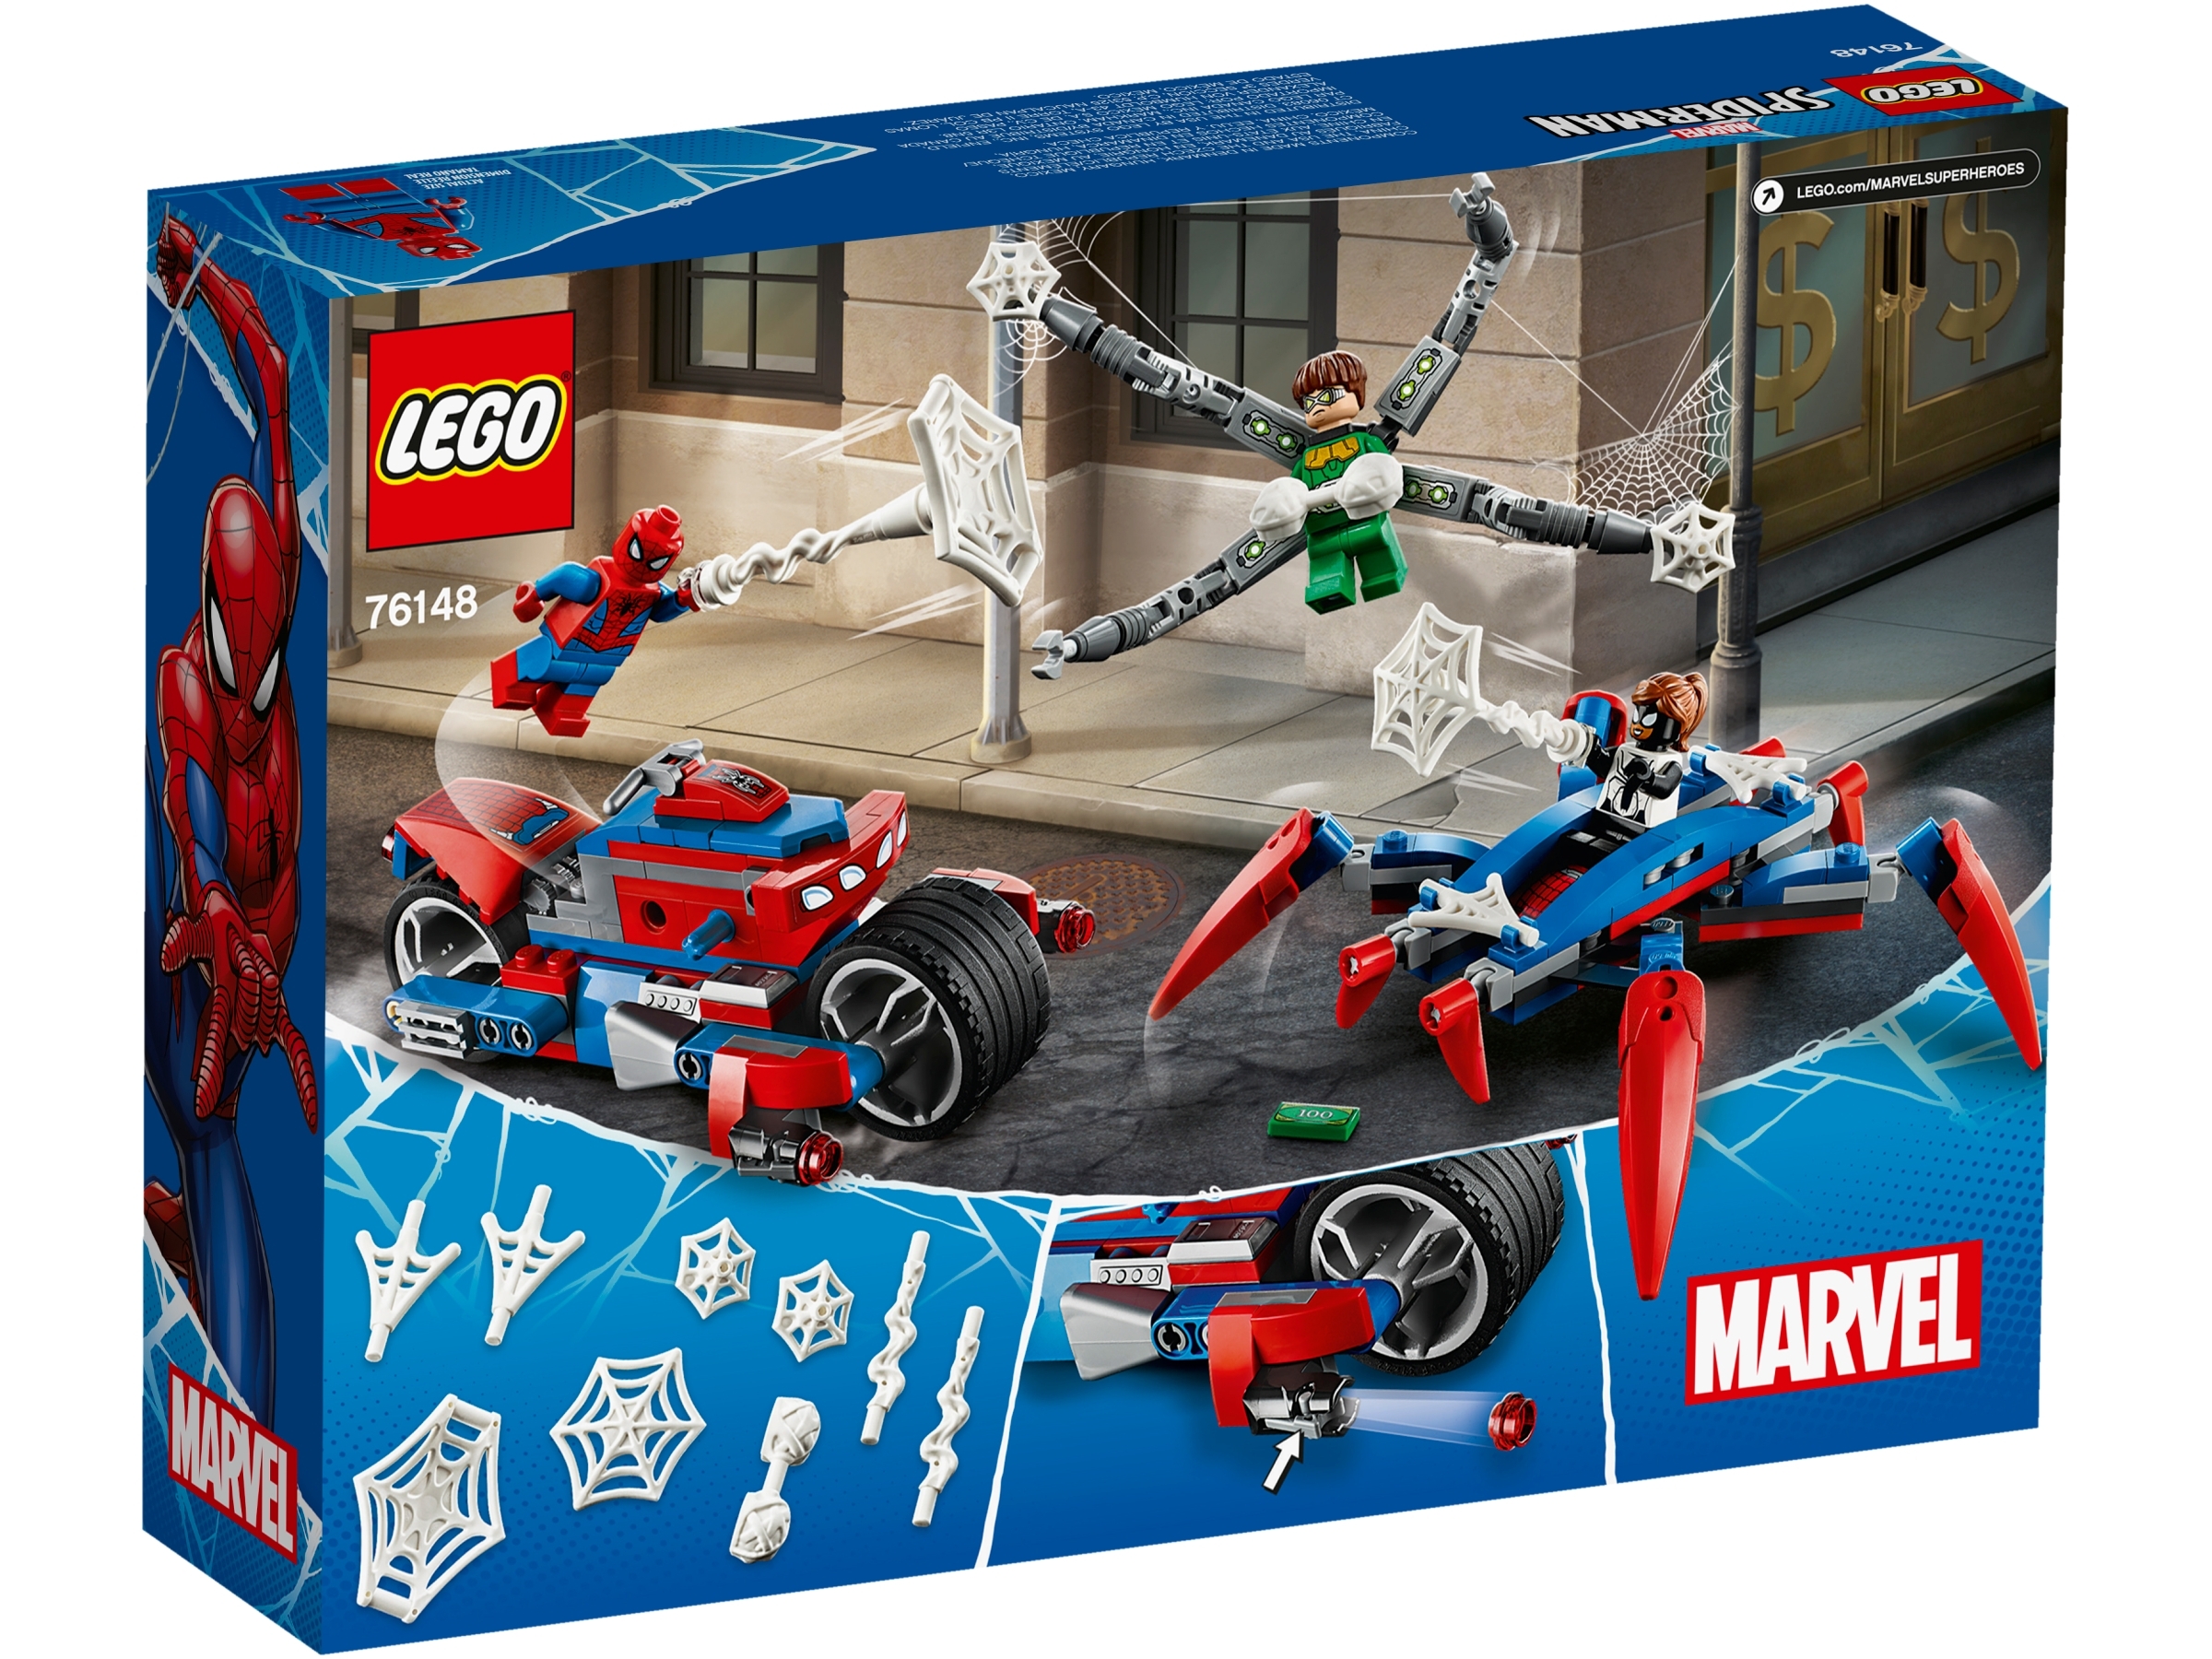 Arms 4855 Details about  / Lego Marvel Spider-man Super Heroes Minifigure Dr Octopus Sand Green